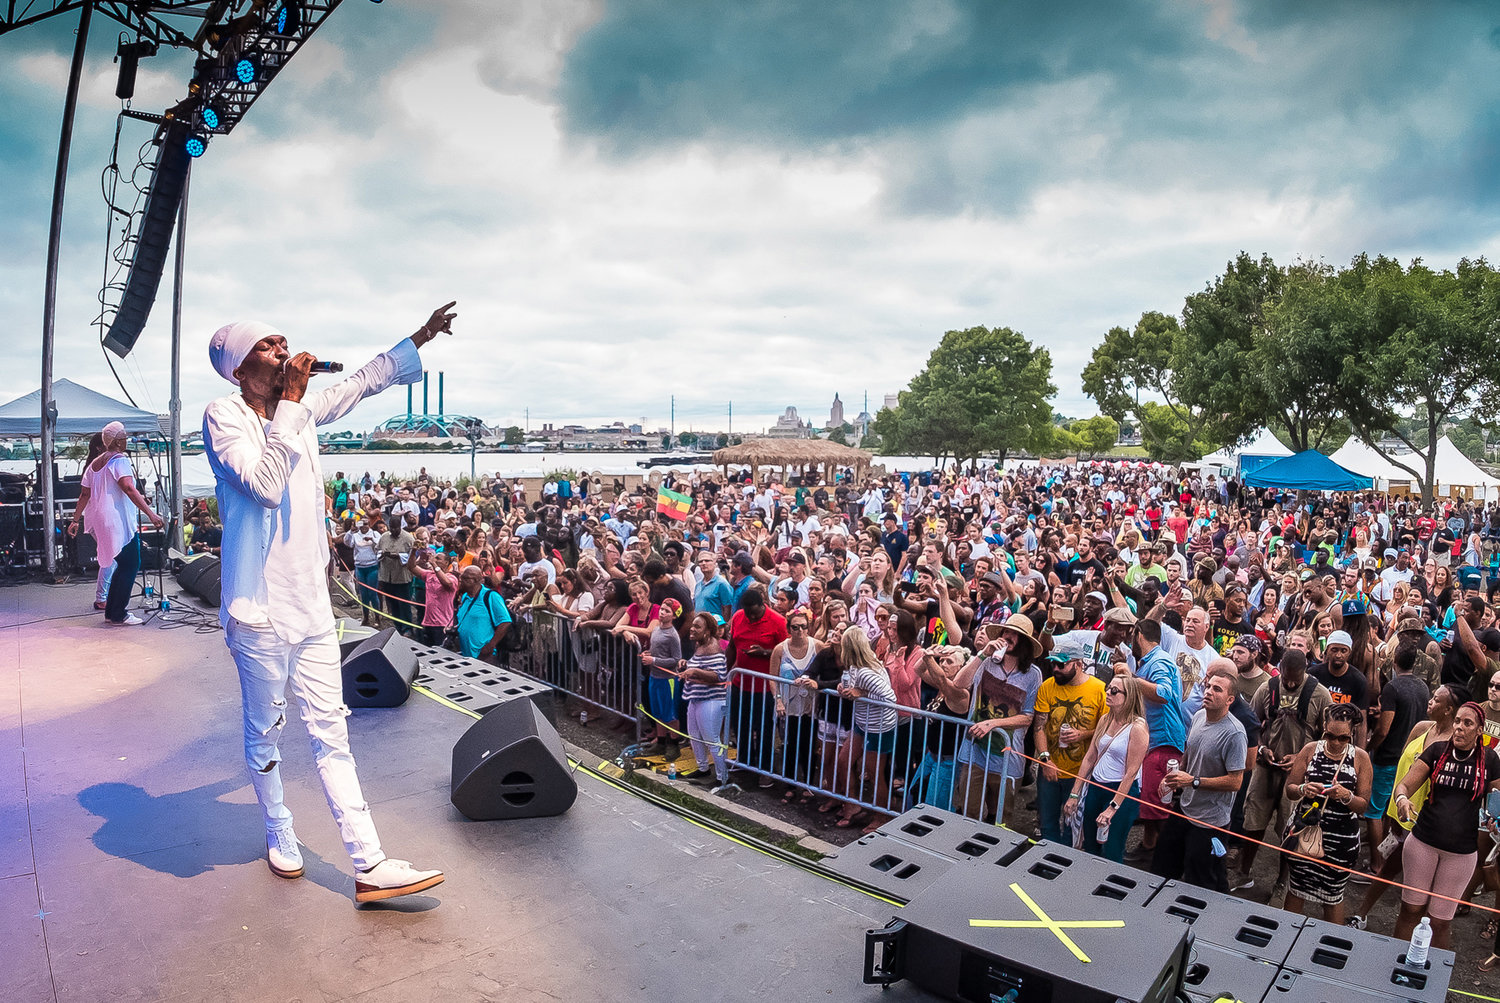 A Reggae Festival that came to Bold Point Park in 2017